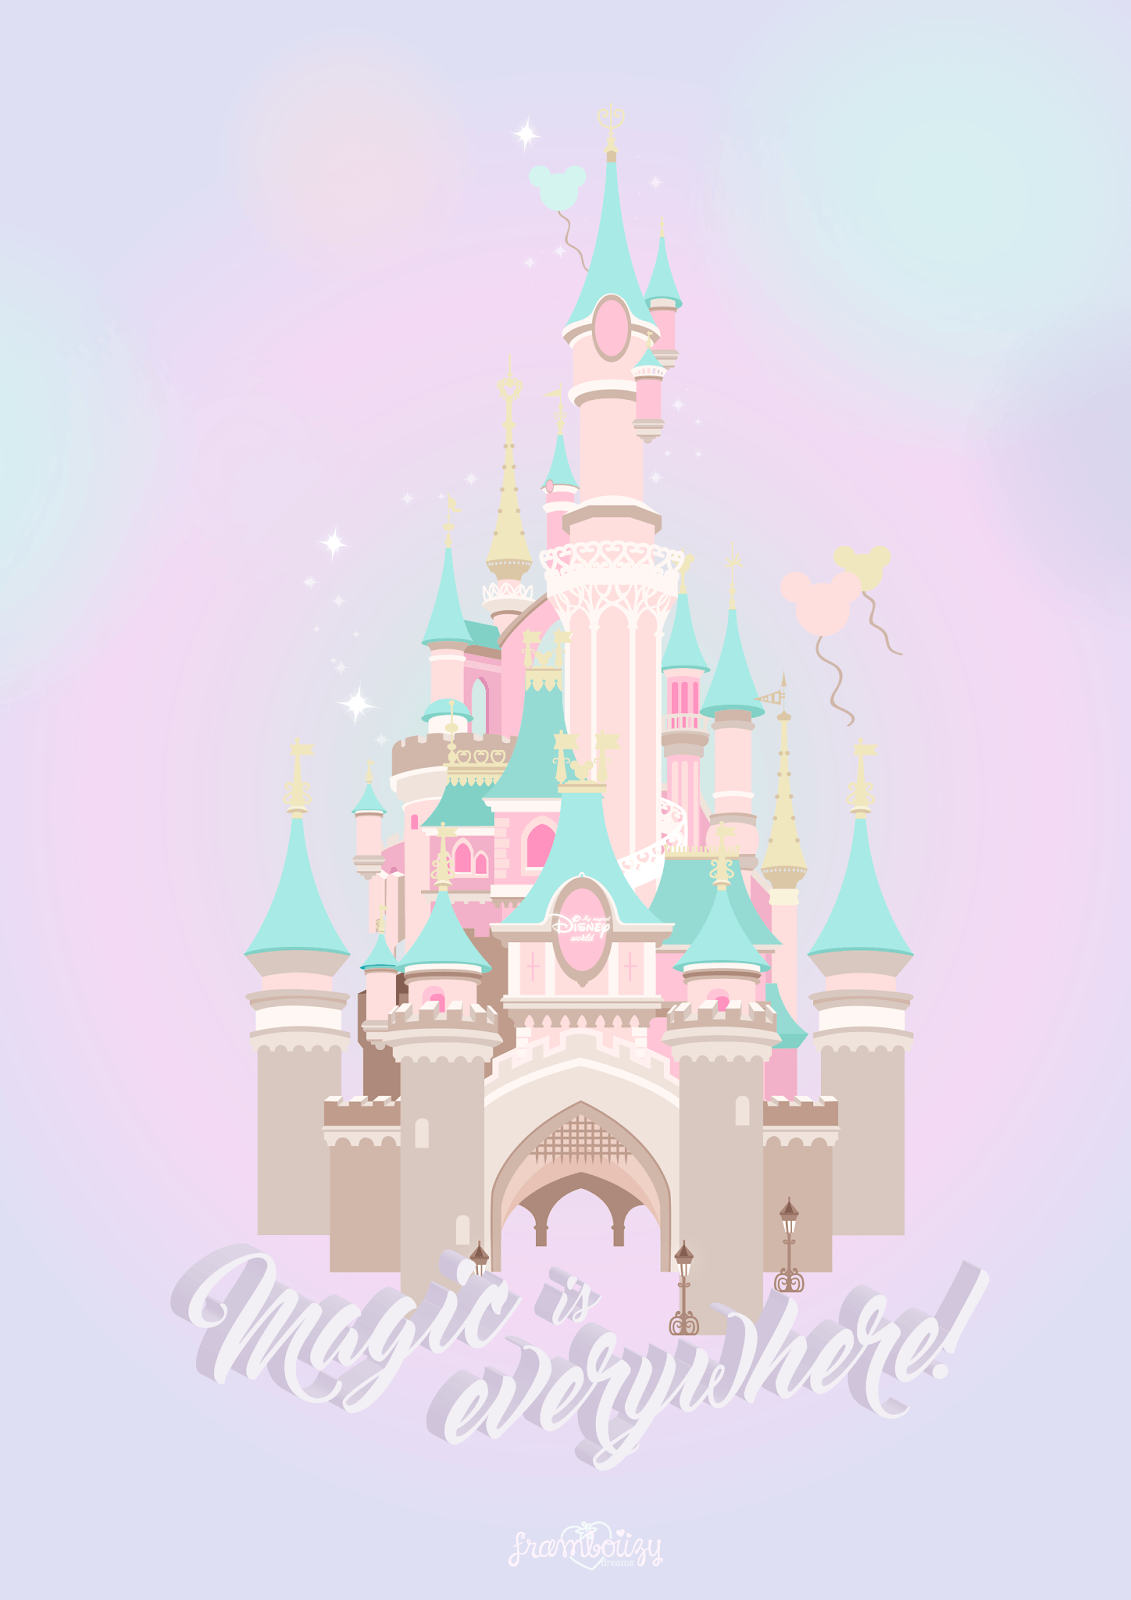 Disney princess castle with clouds and balloons - Disney